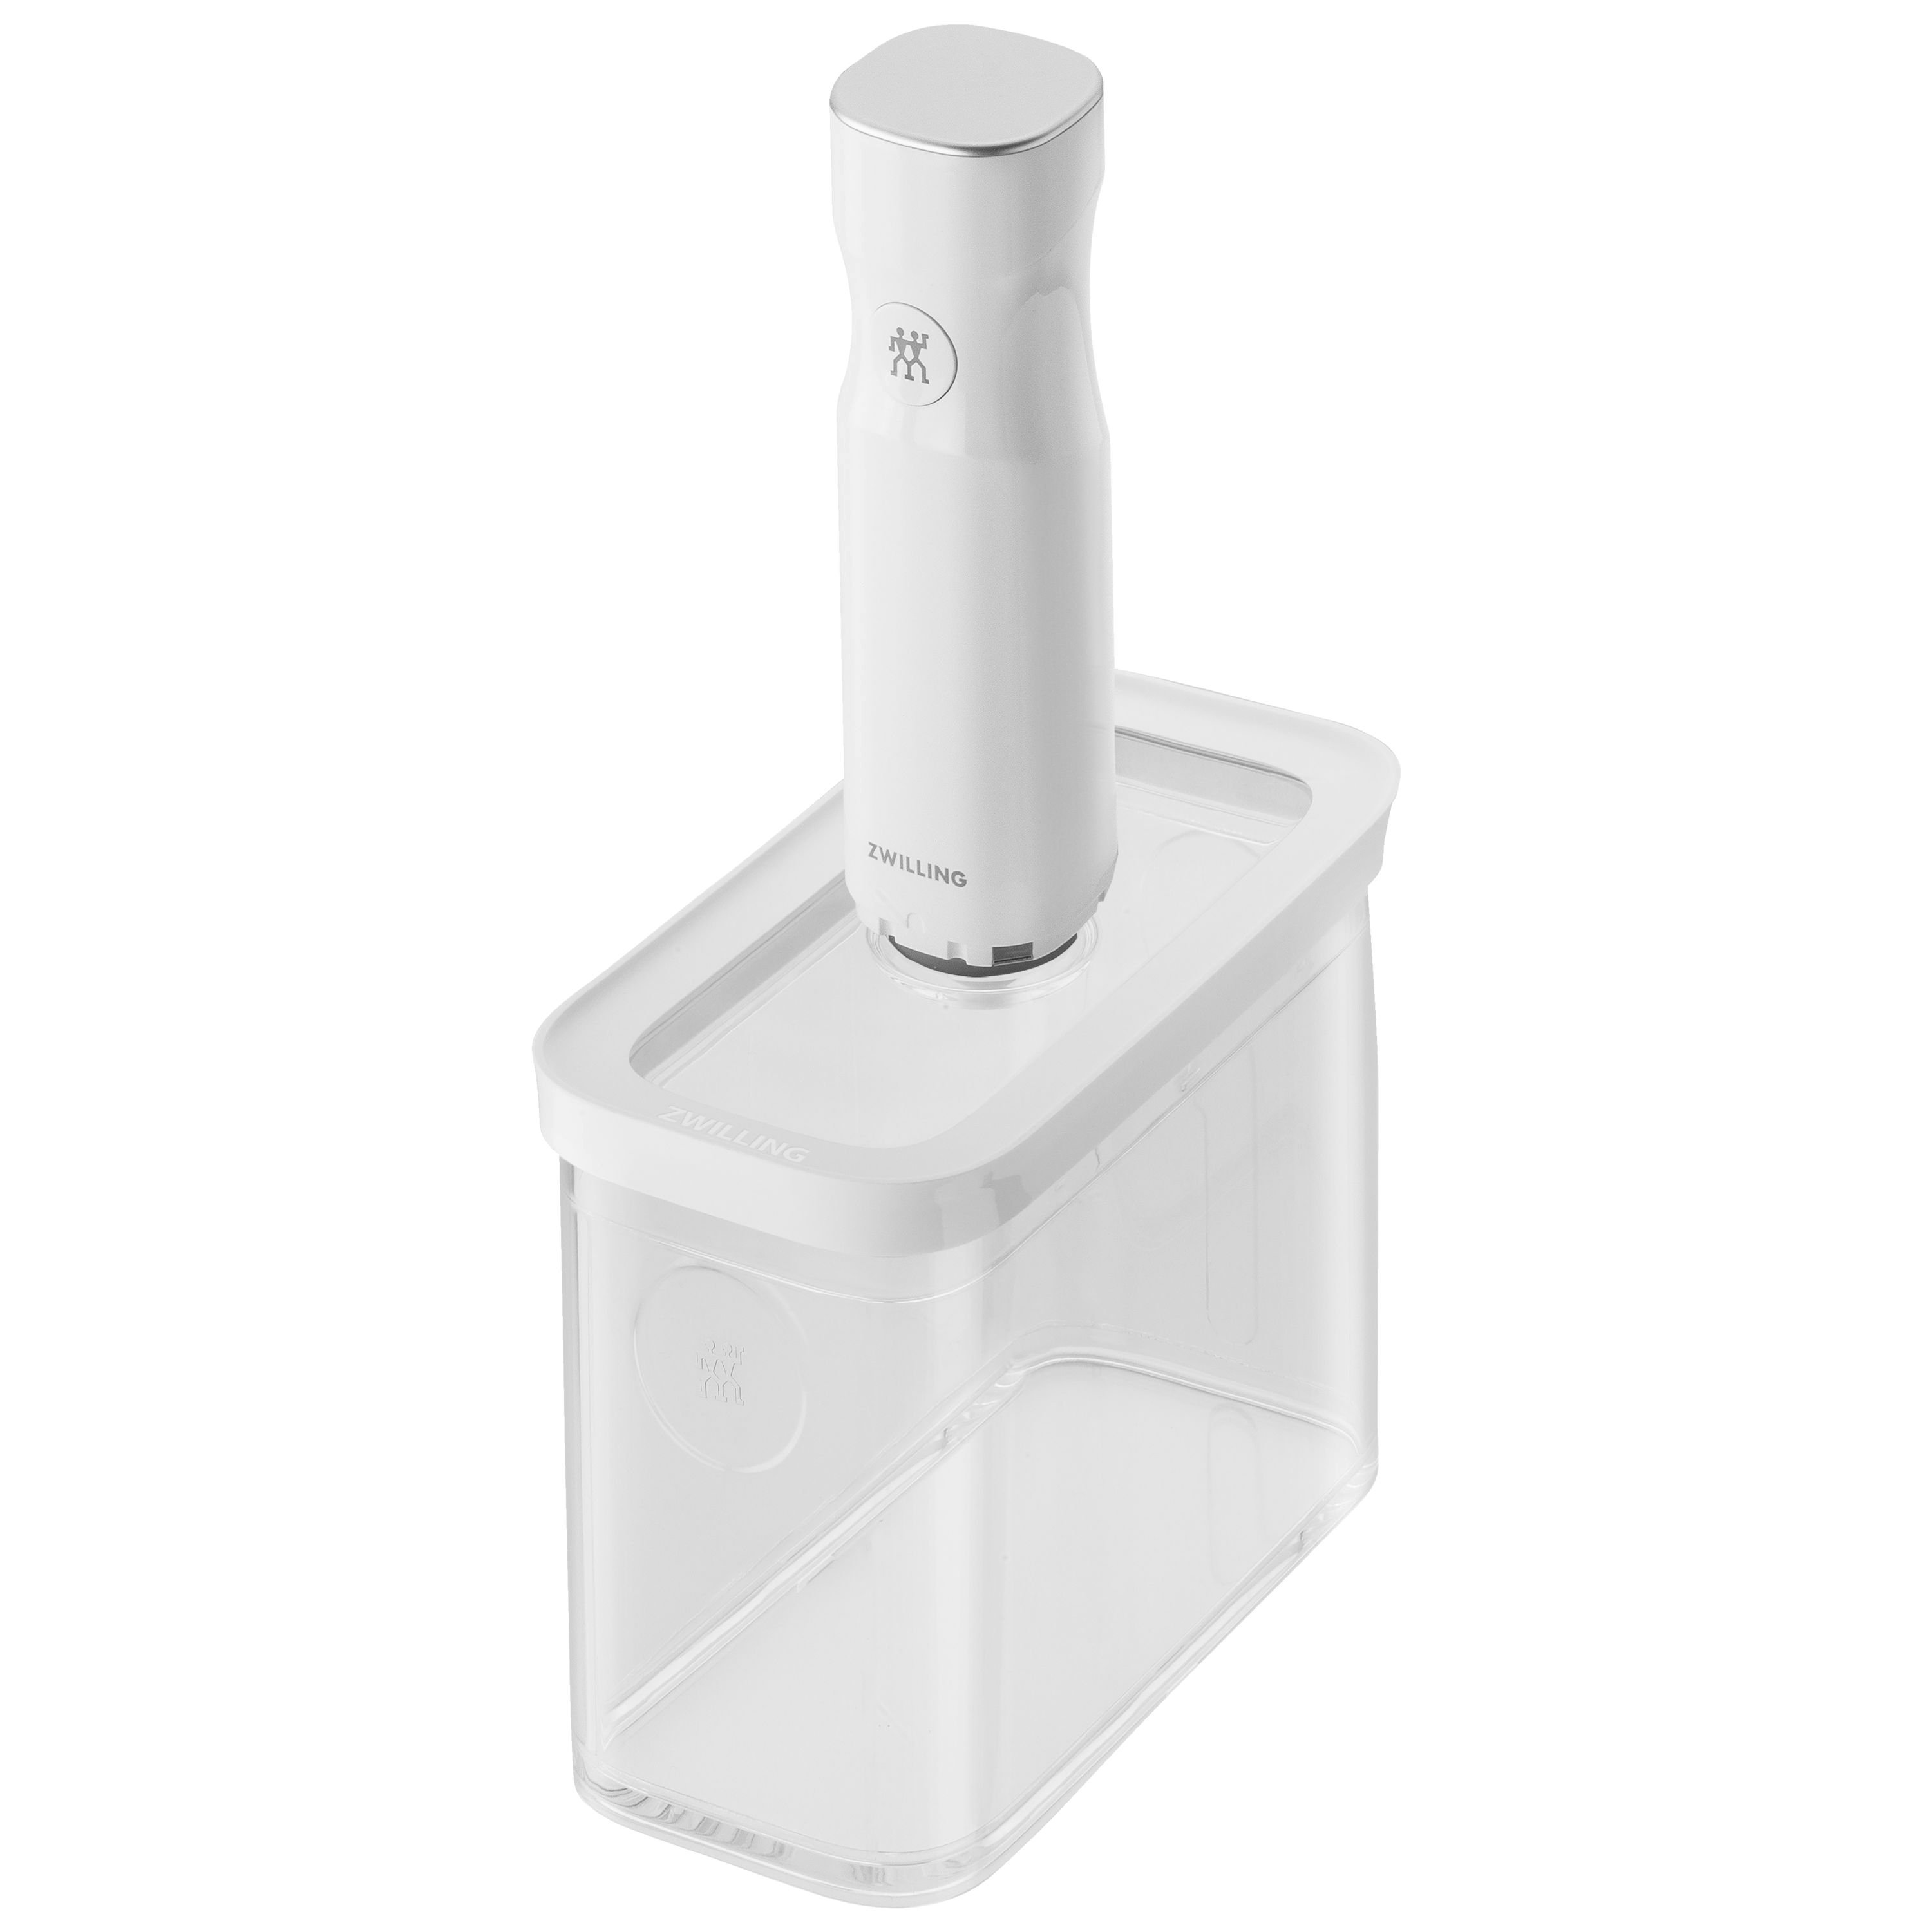 ZWILLING 0.35 Qt. Small Container, Fresh & Save Cube Series in